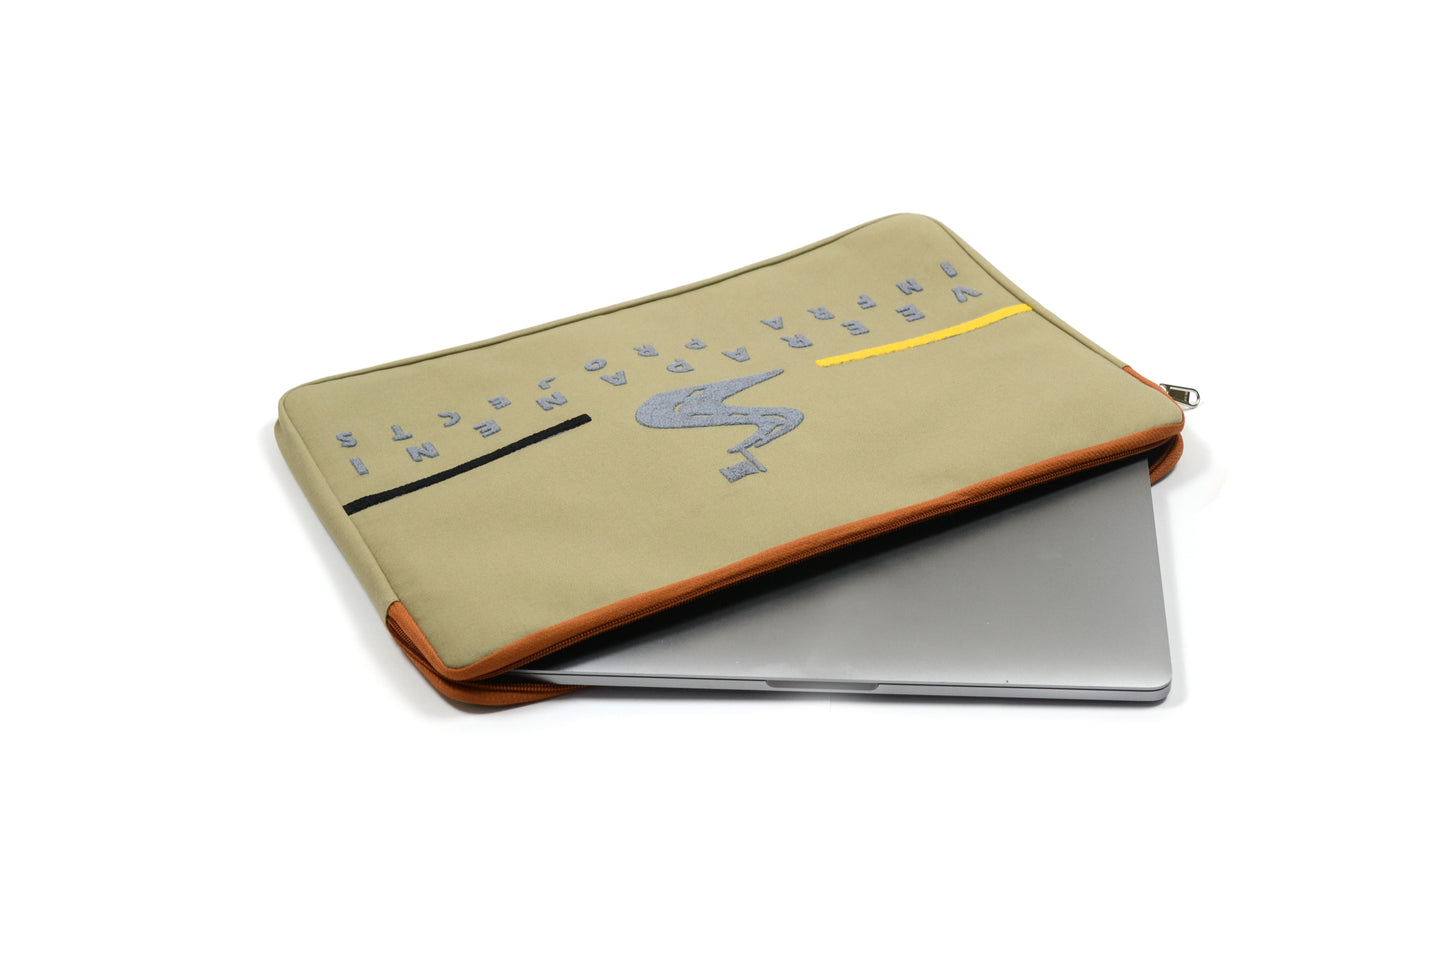 "Brand Your Tech" Laptop Sleeve